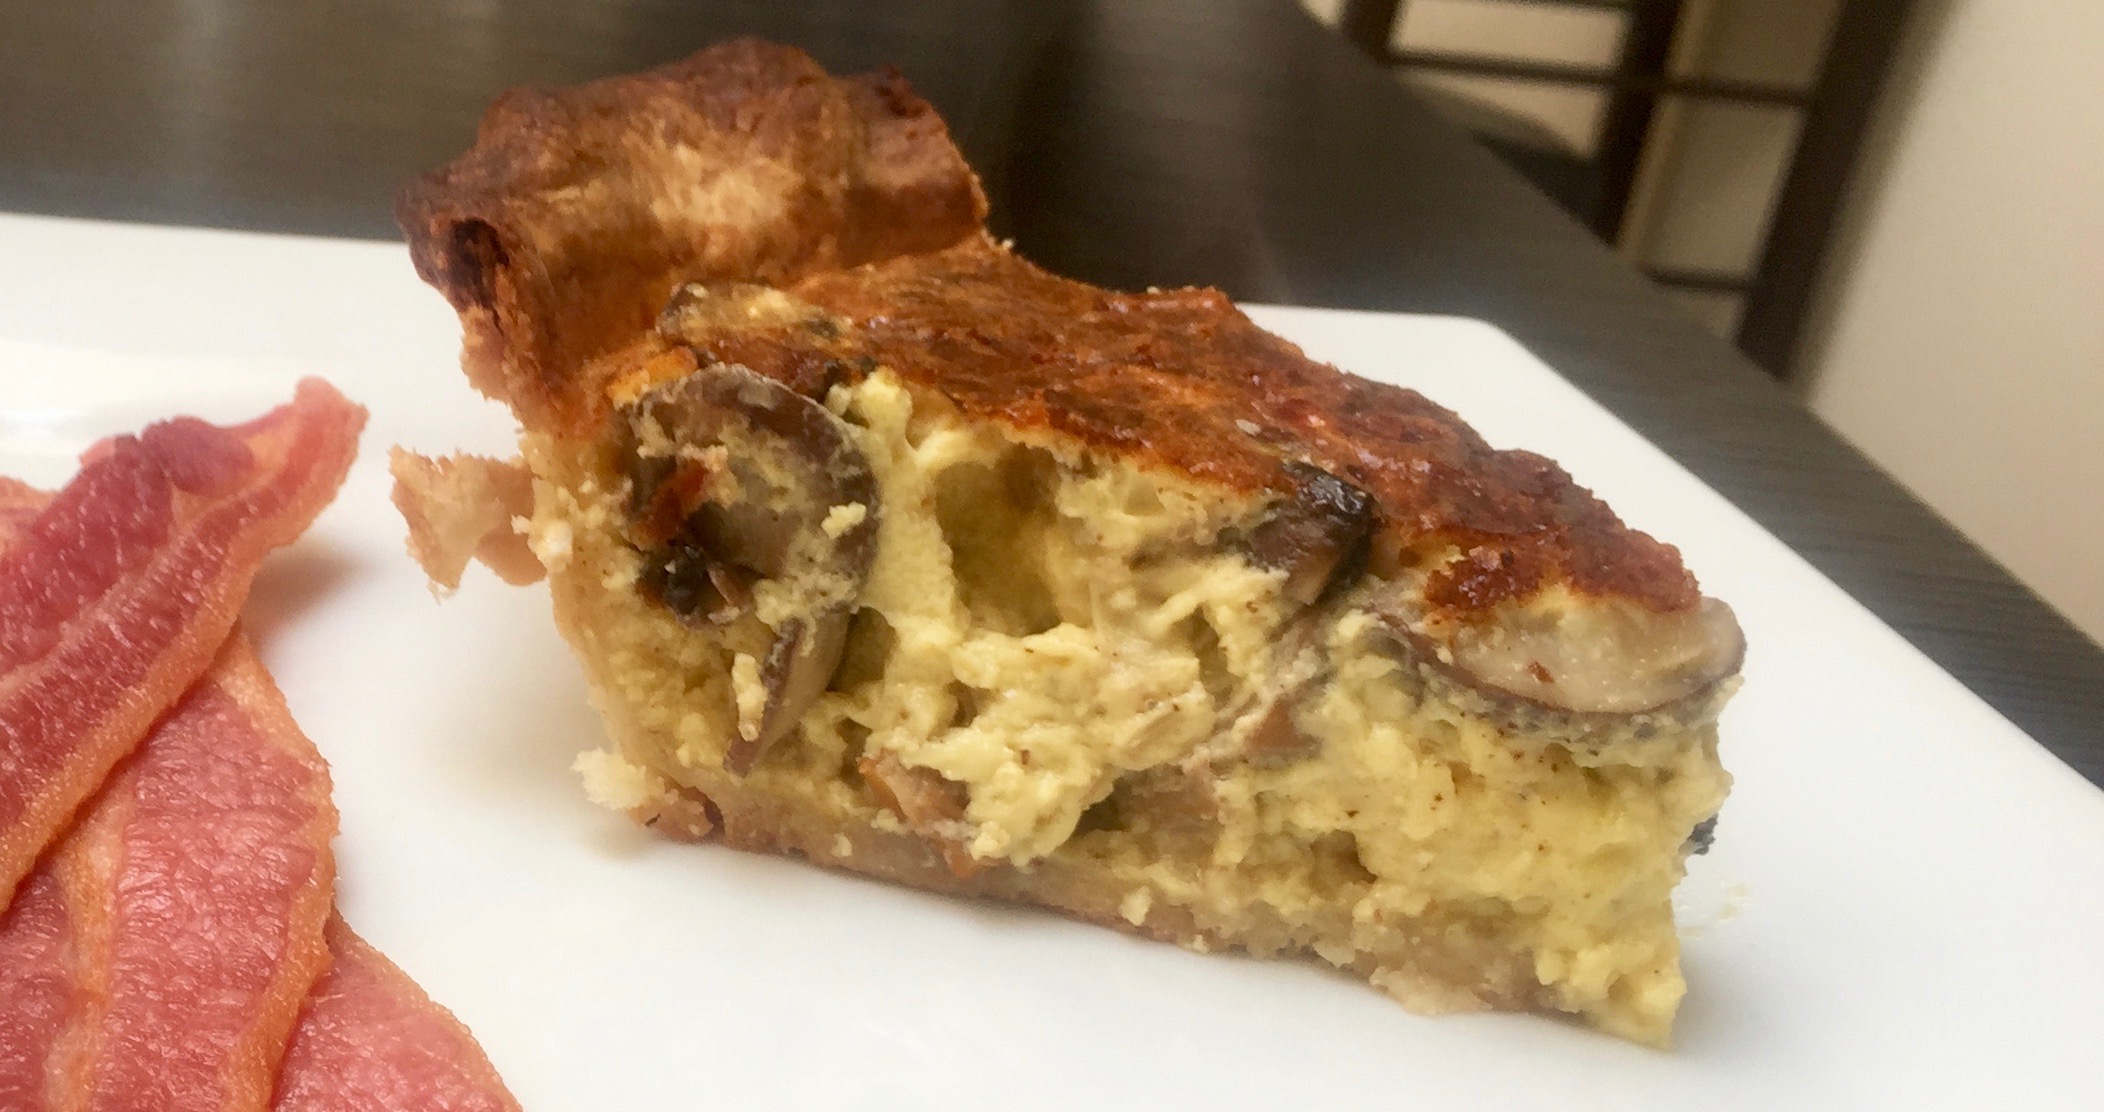 Whit’s Cheese and Mushroom Quiche – The Perfect Brunch Food!